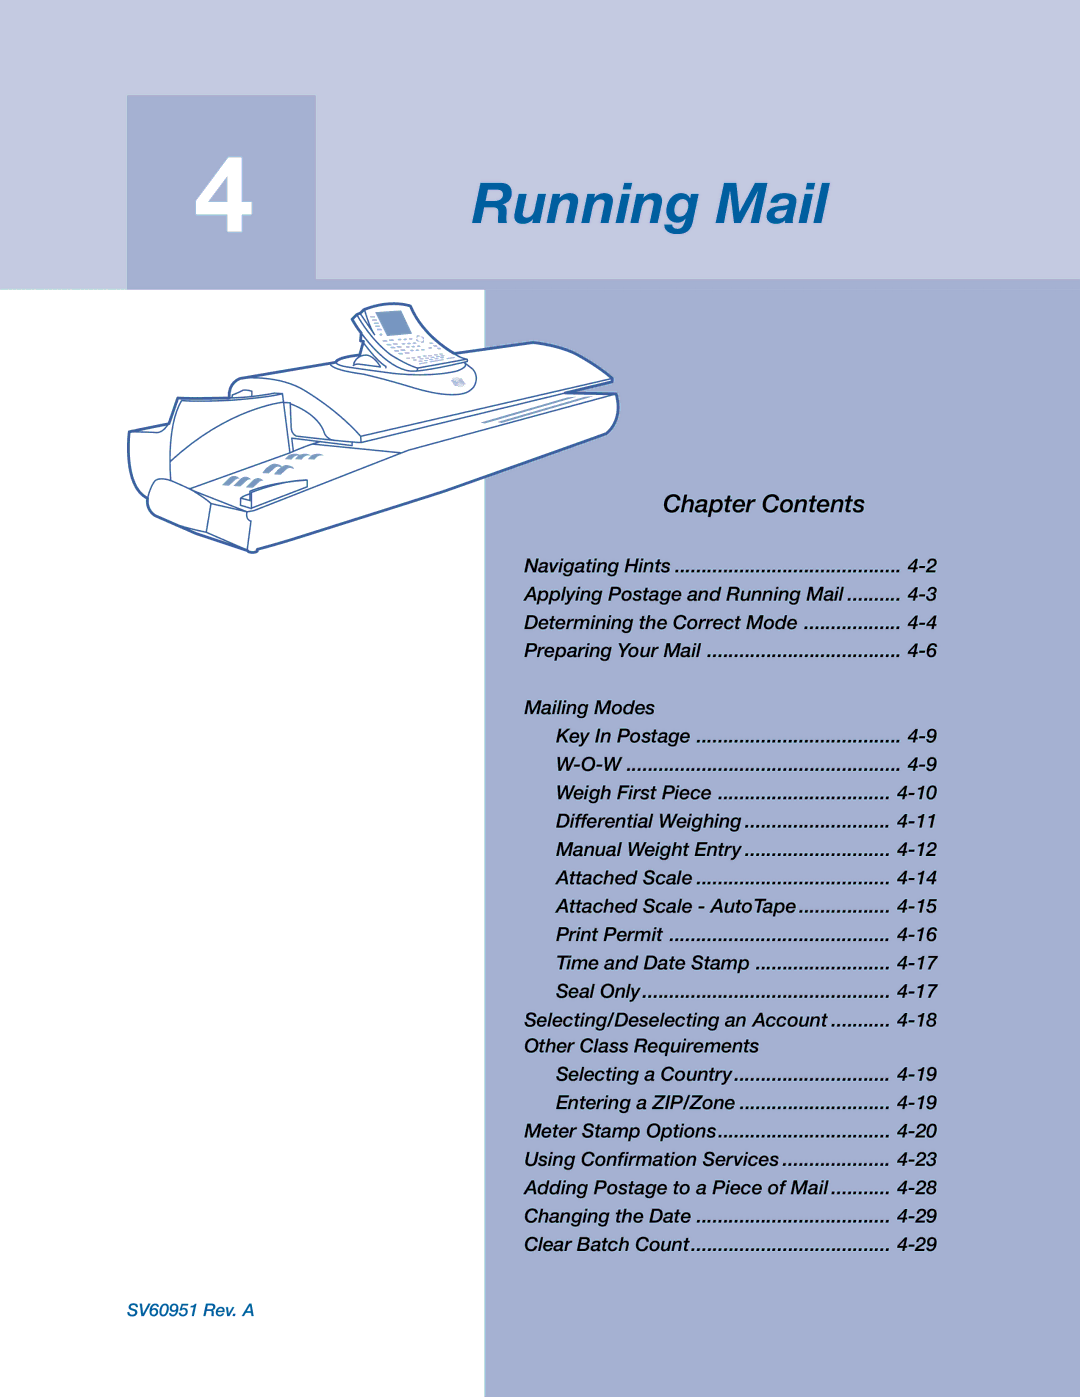 Pitney Bowes DM1000 manual Running Mail 